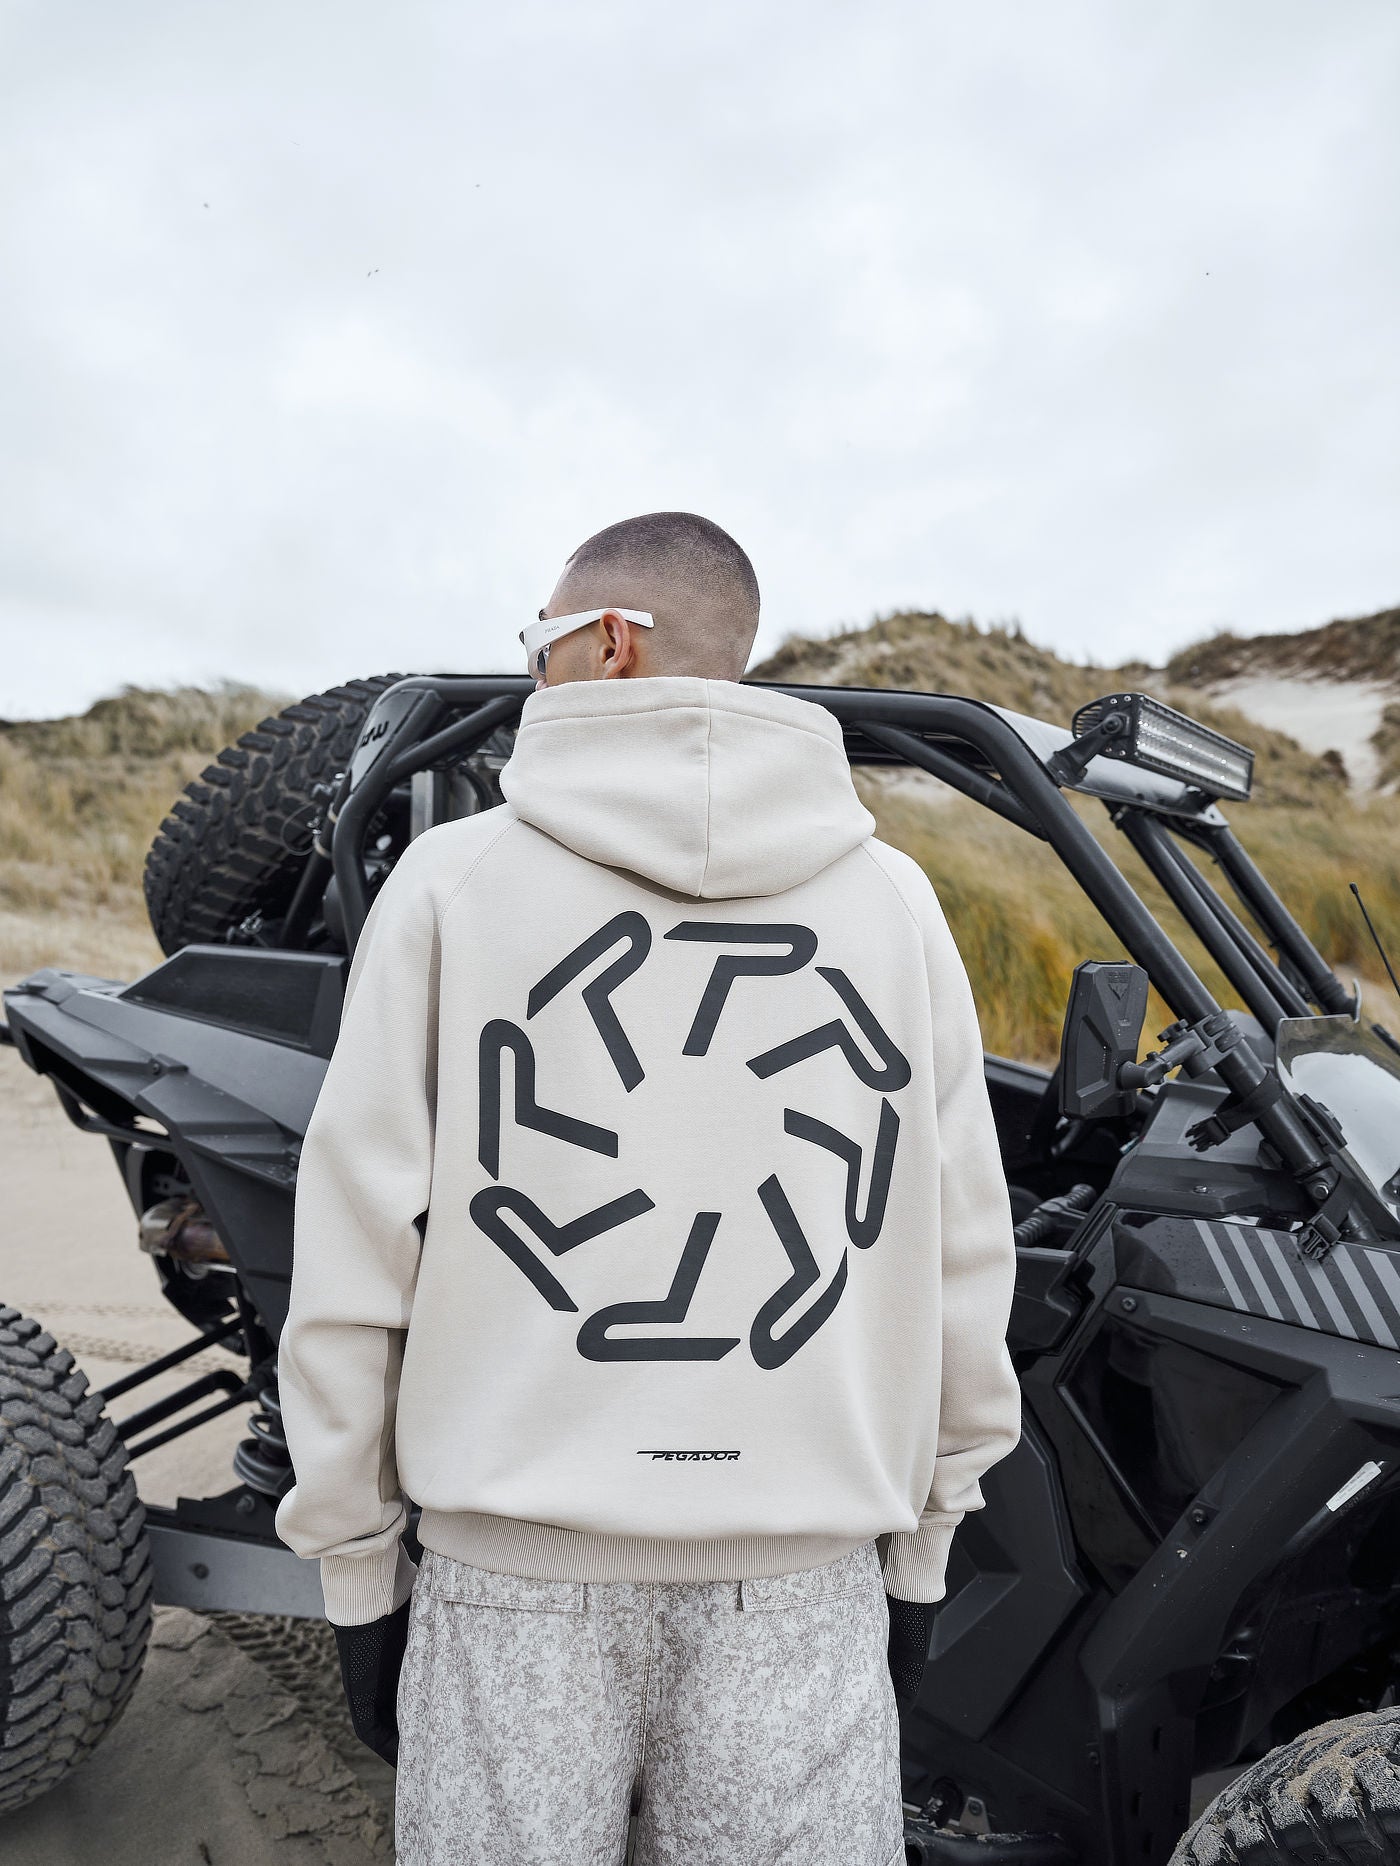 Barone Raglan Hoodie Washed Dust Cream from the 'Do Not Disturb' collection, designed for comfort and relaxation, set against a serene background, symbolizing a break from the fast-paced world.